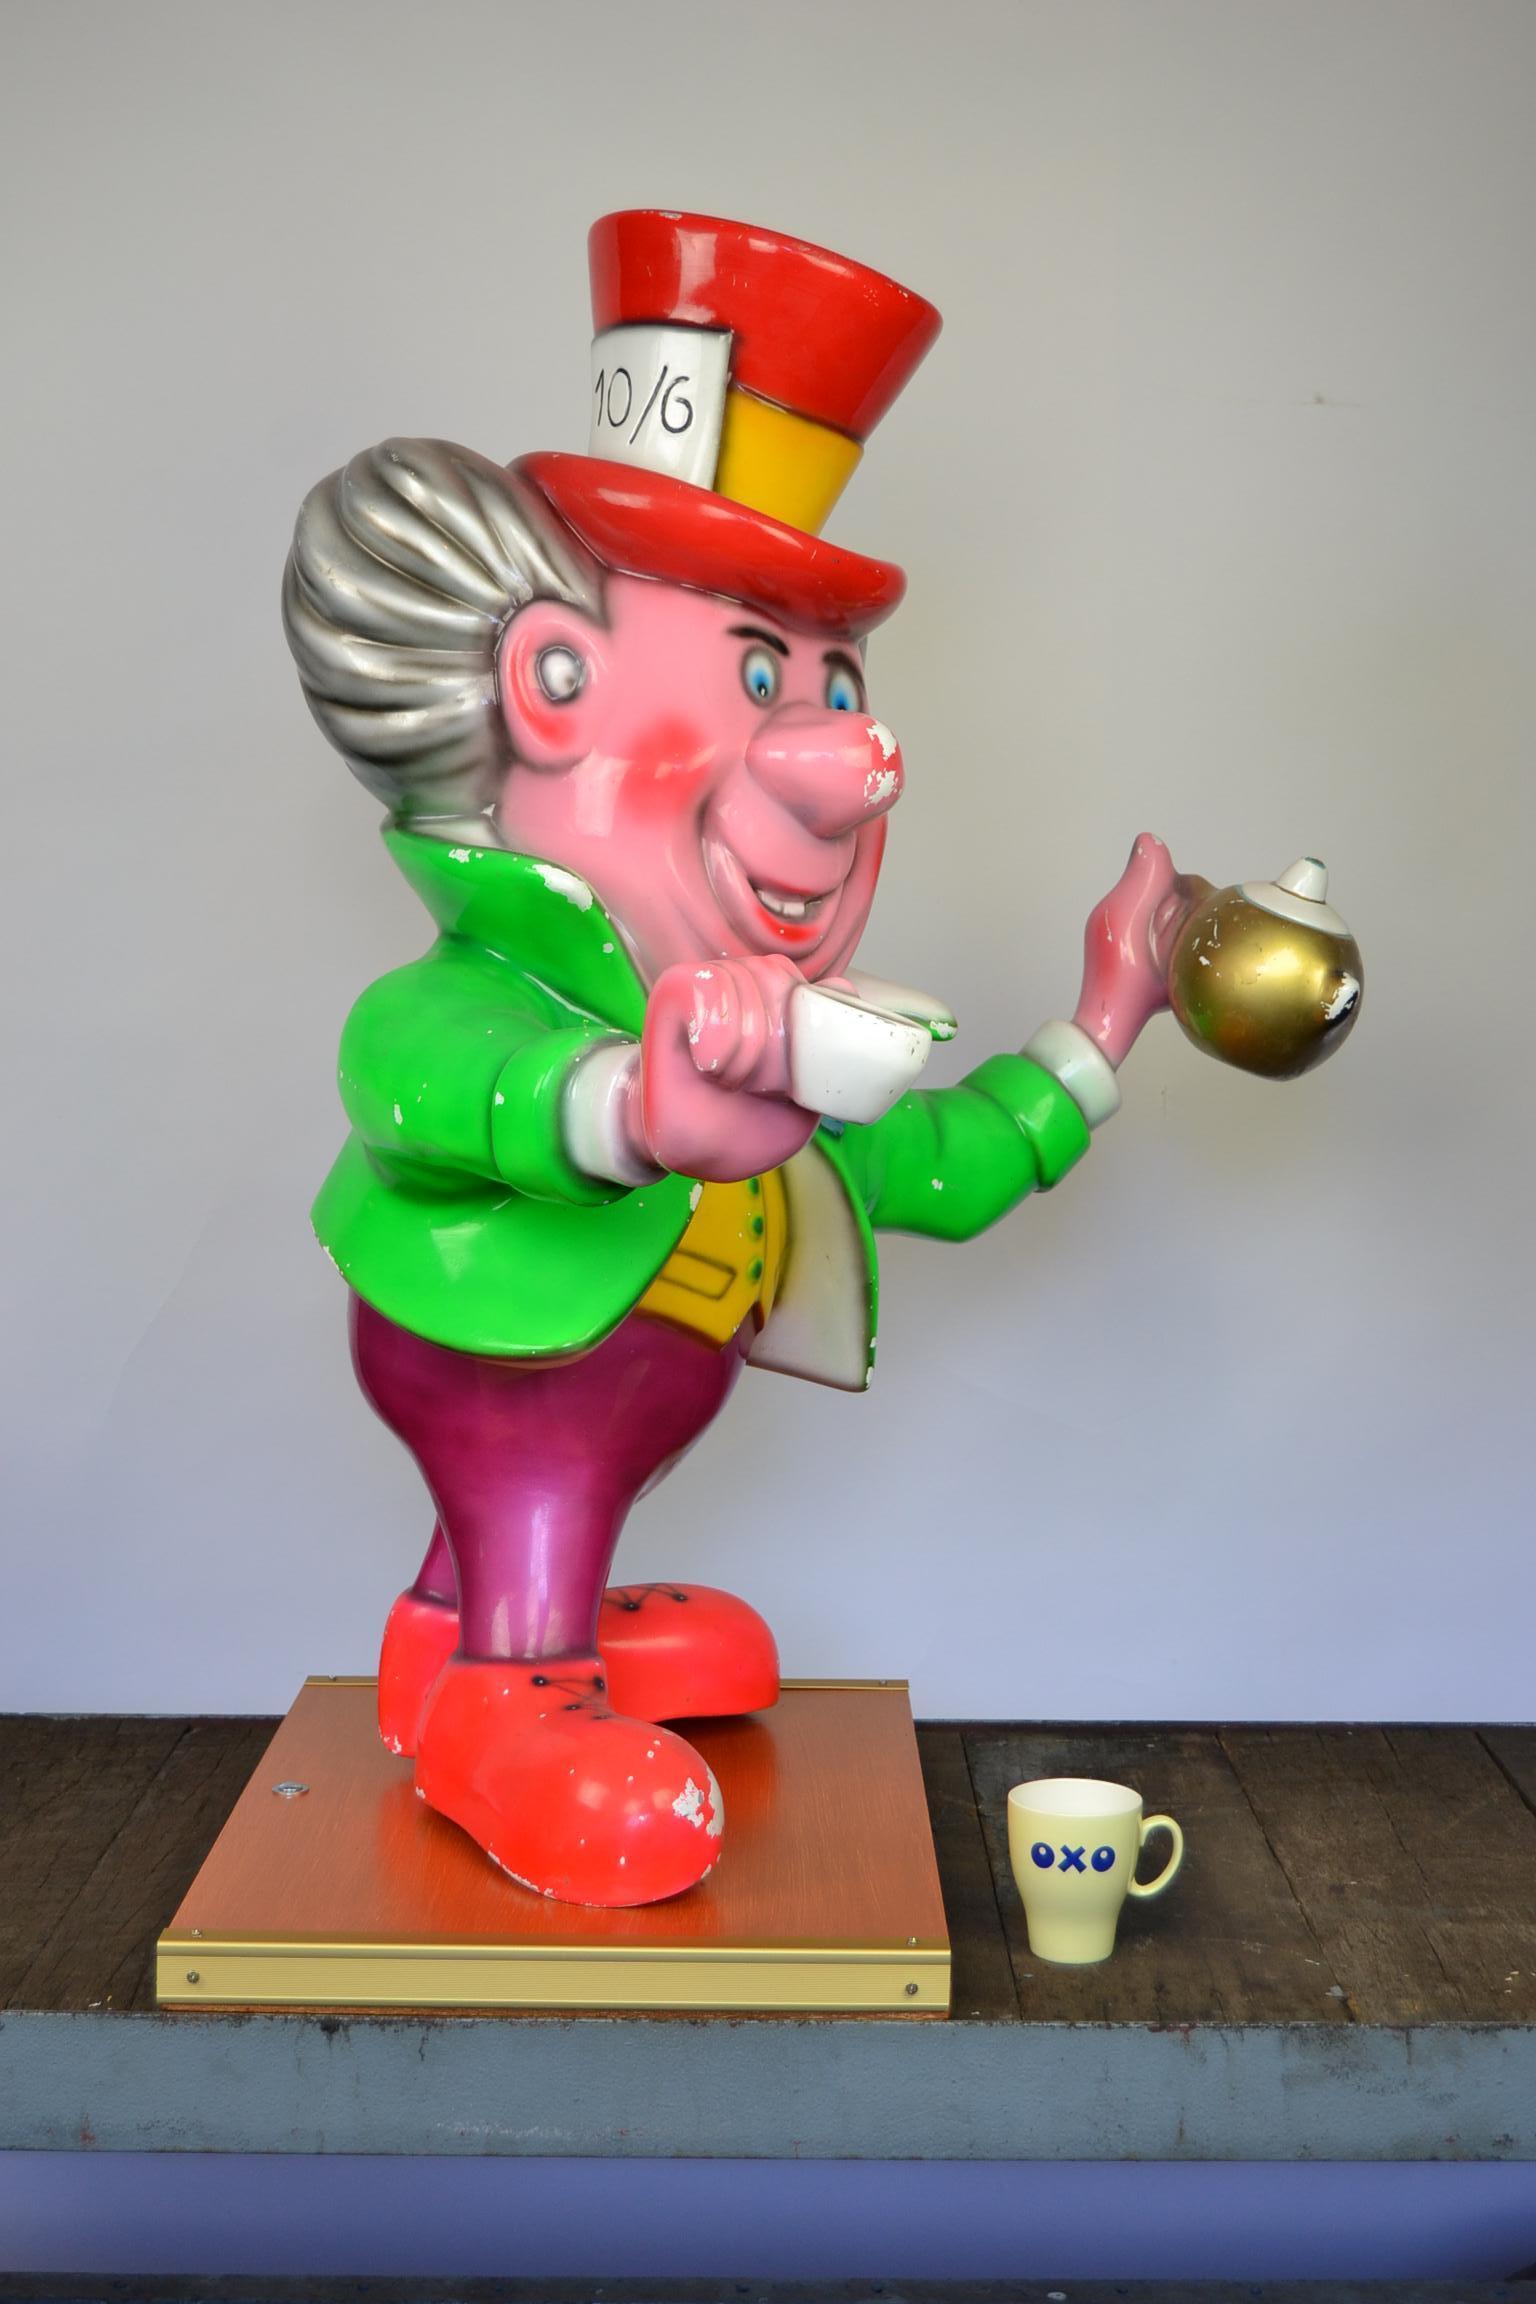 Funny vintage fiberglass coffee man - Mad Hatter - 
Male figurine in sparkling colors with cup and coffeepot, 
based on the Disney's Fairytale Movie 'Alice in Wonderland'.

Placed on a wooden base, this crazy man with large hat, a coffee cup and